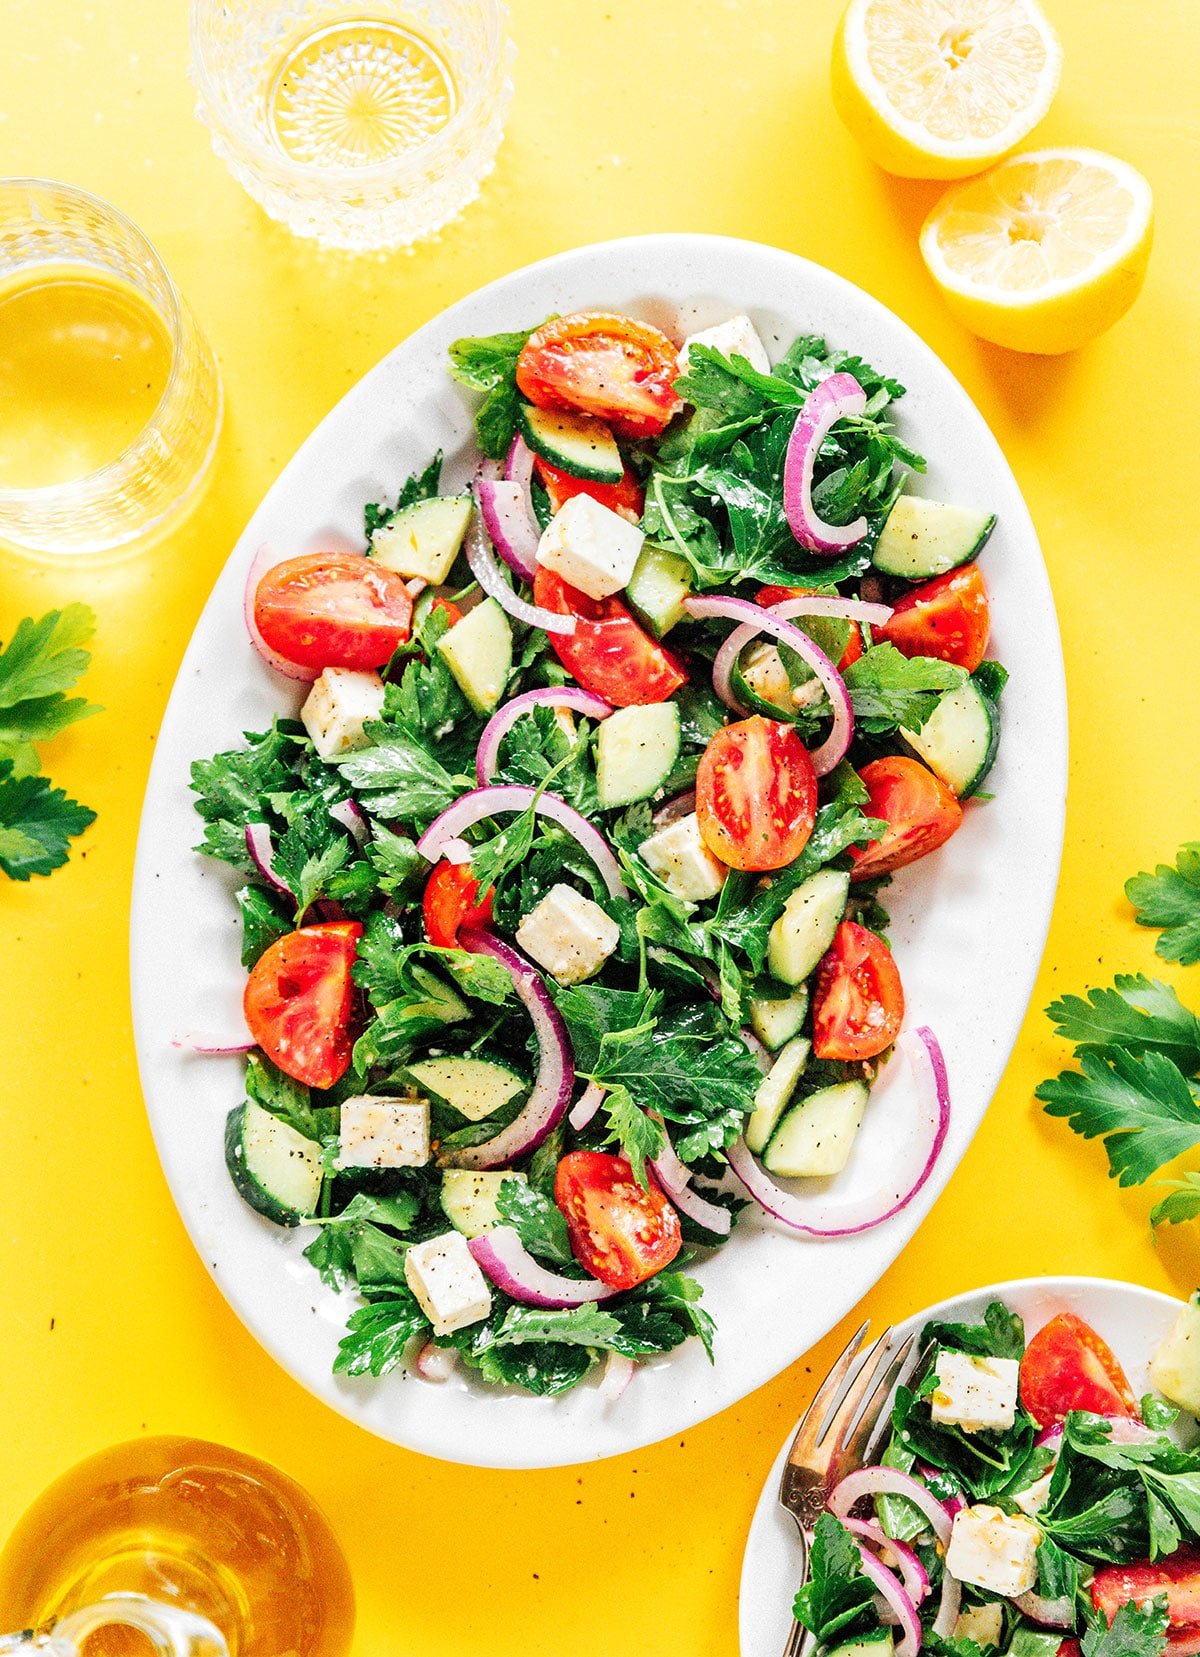 Parsley salad with tomatoes, cucumber, red onions, and dressing on a white serving plater on a yellow background.